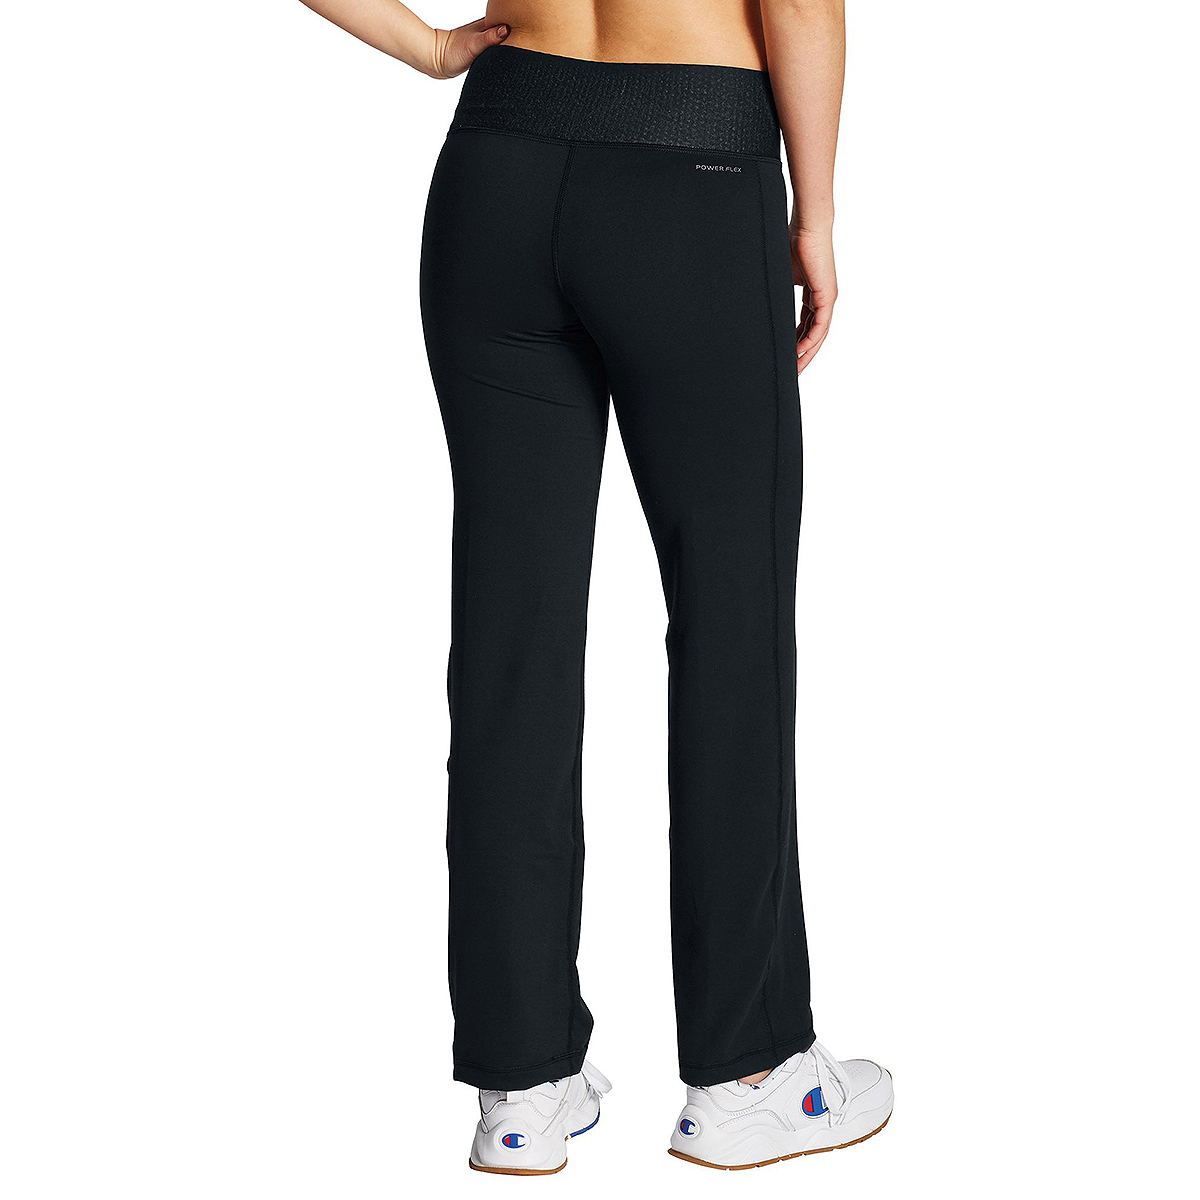 C9 Champion Womens Curvy Fit Yoga Pant  Amazonca Clothing Shoes   Accessories